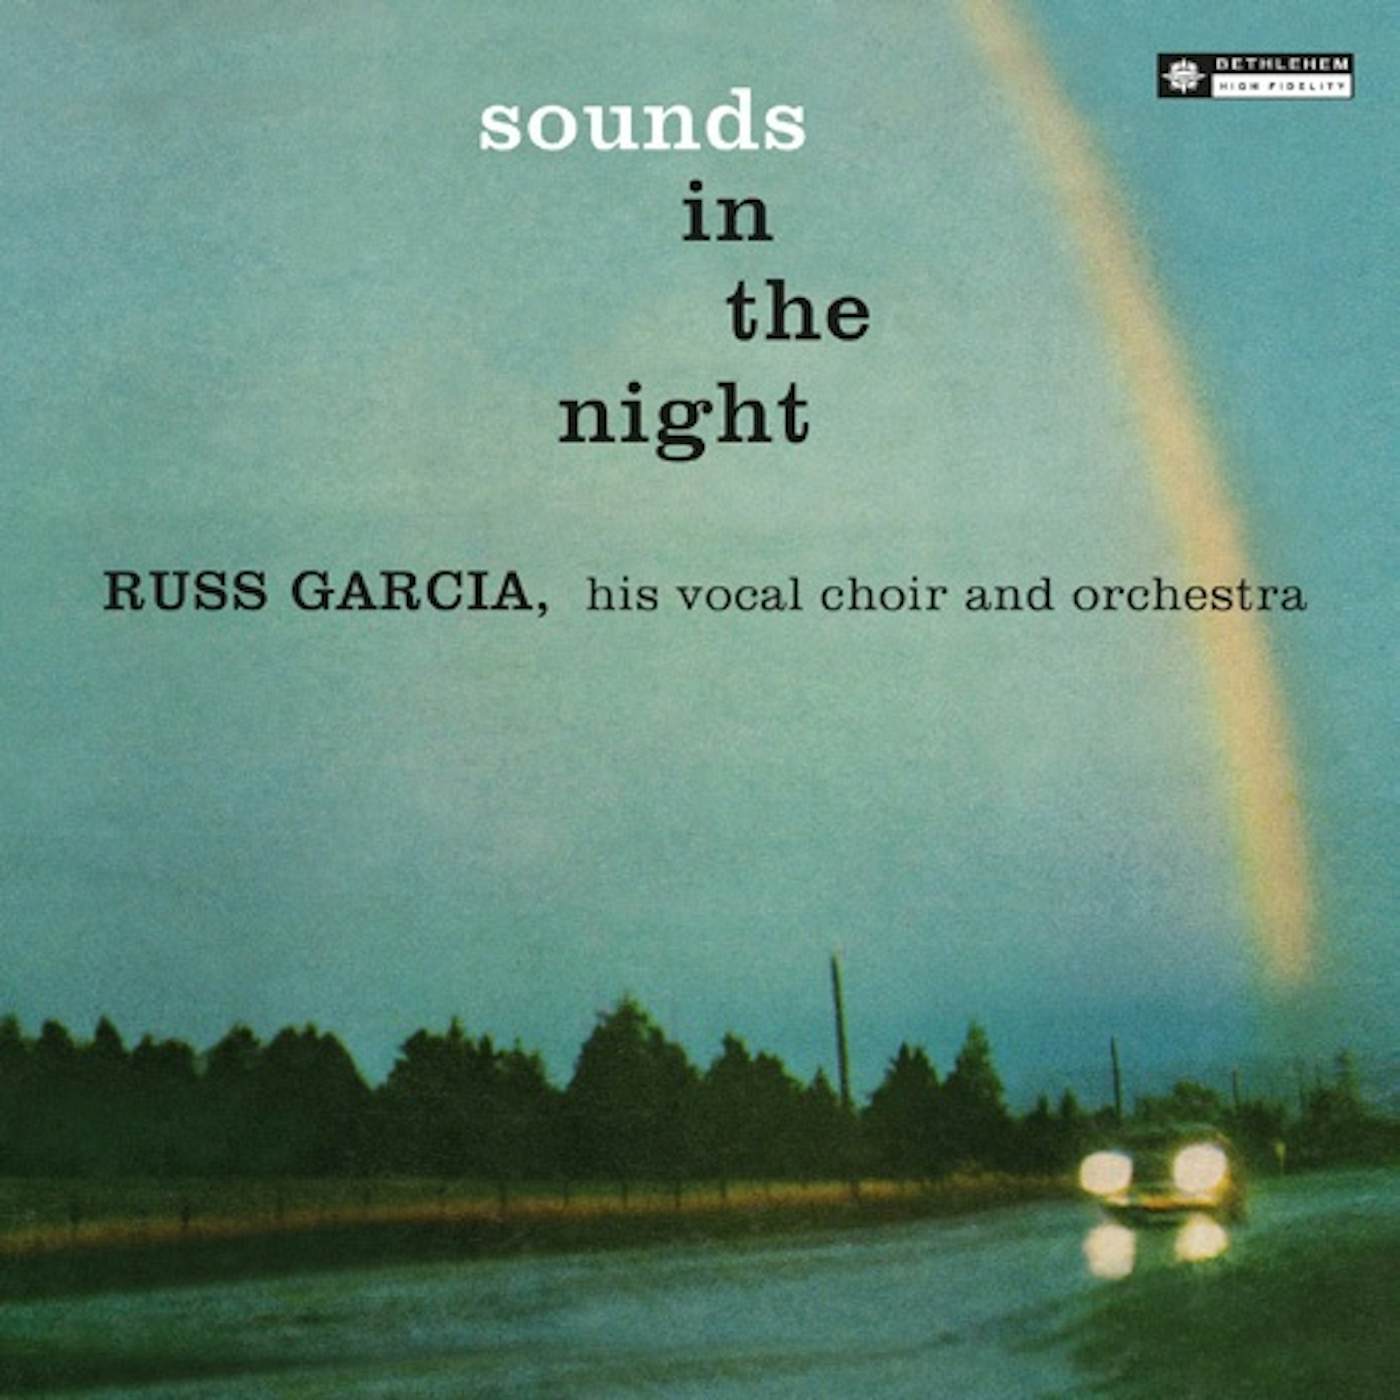 Russ Garcia SOUNDS IN THE NIGHT CD